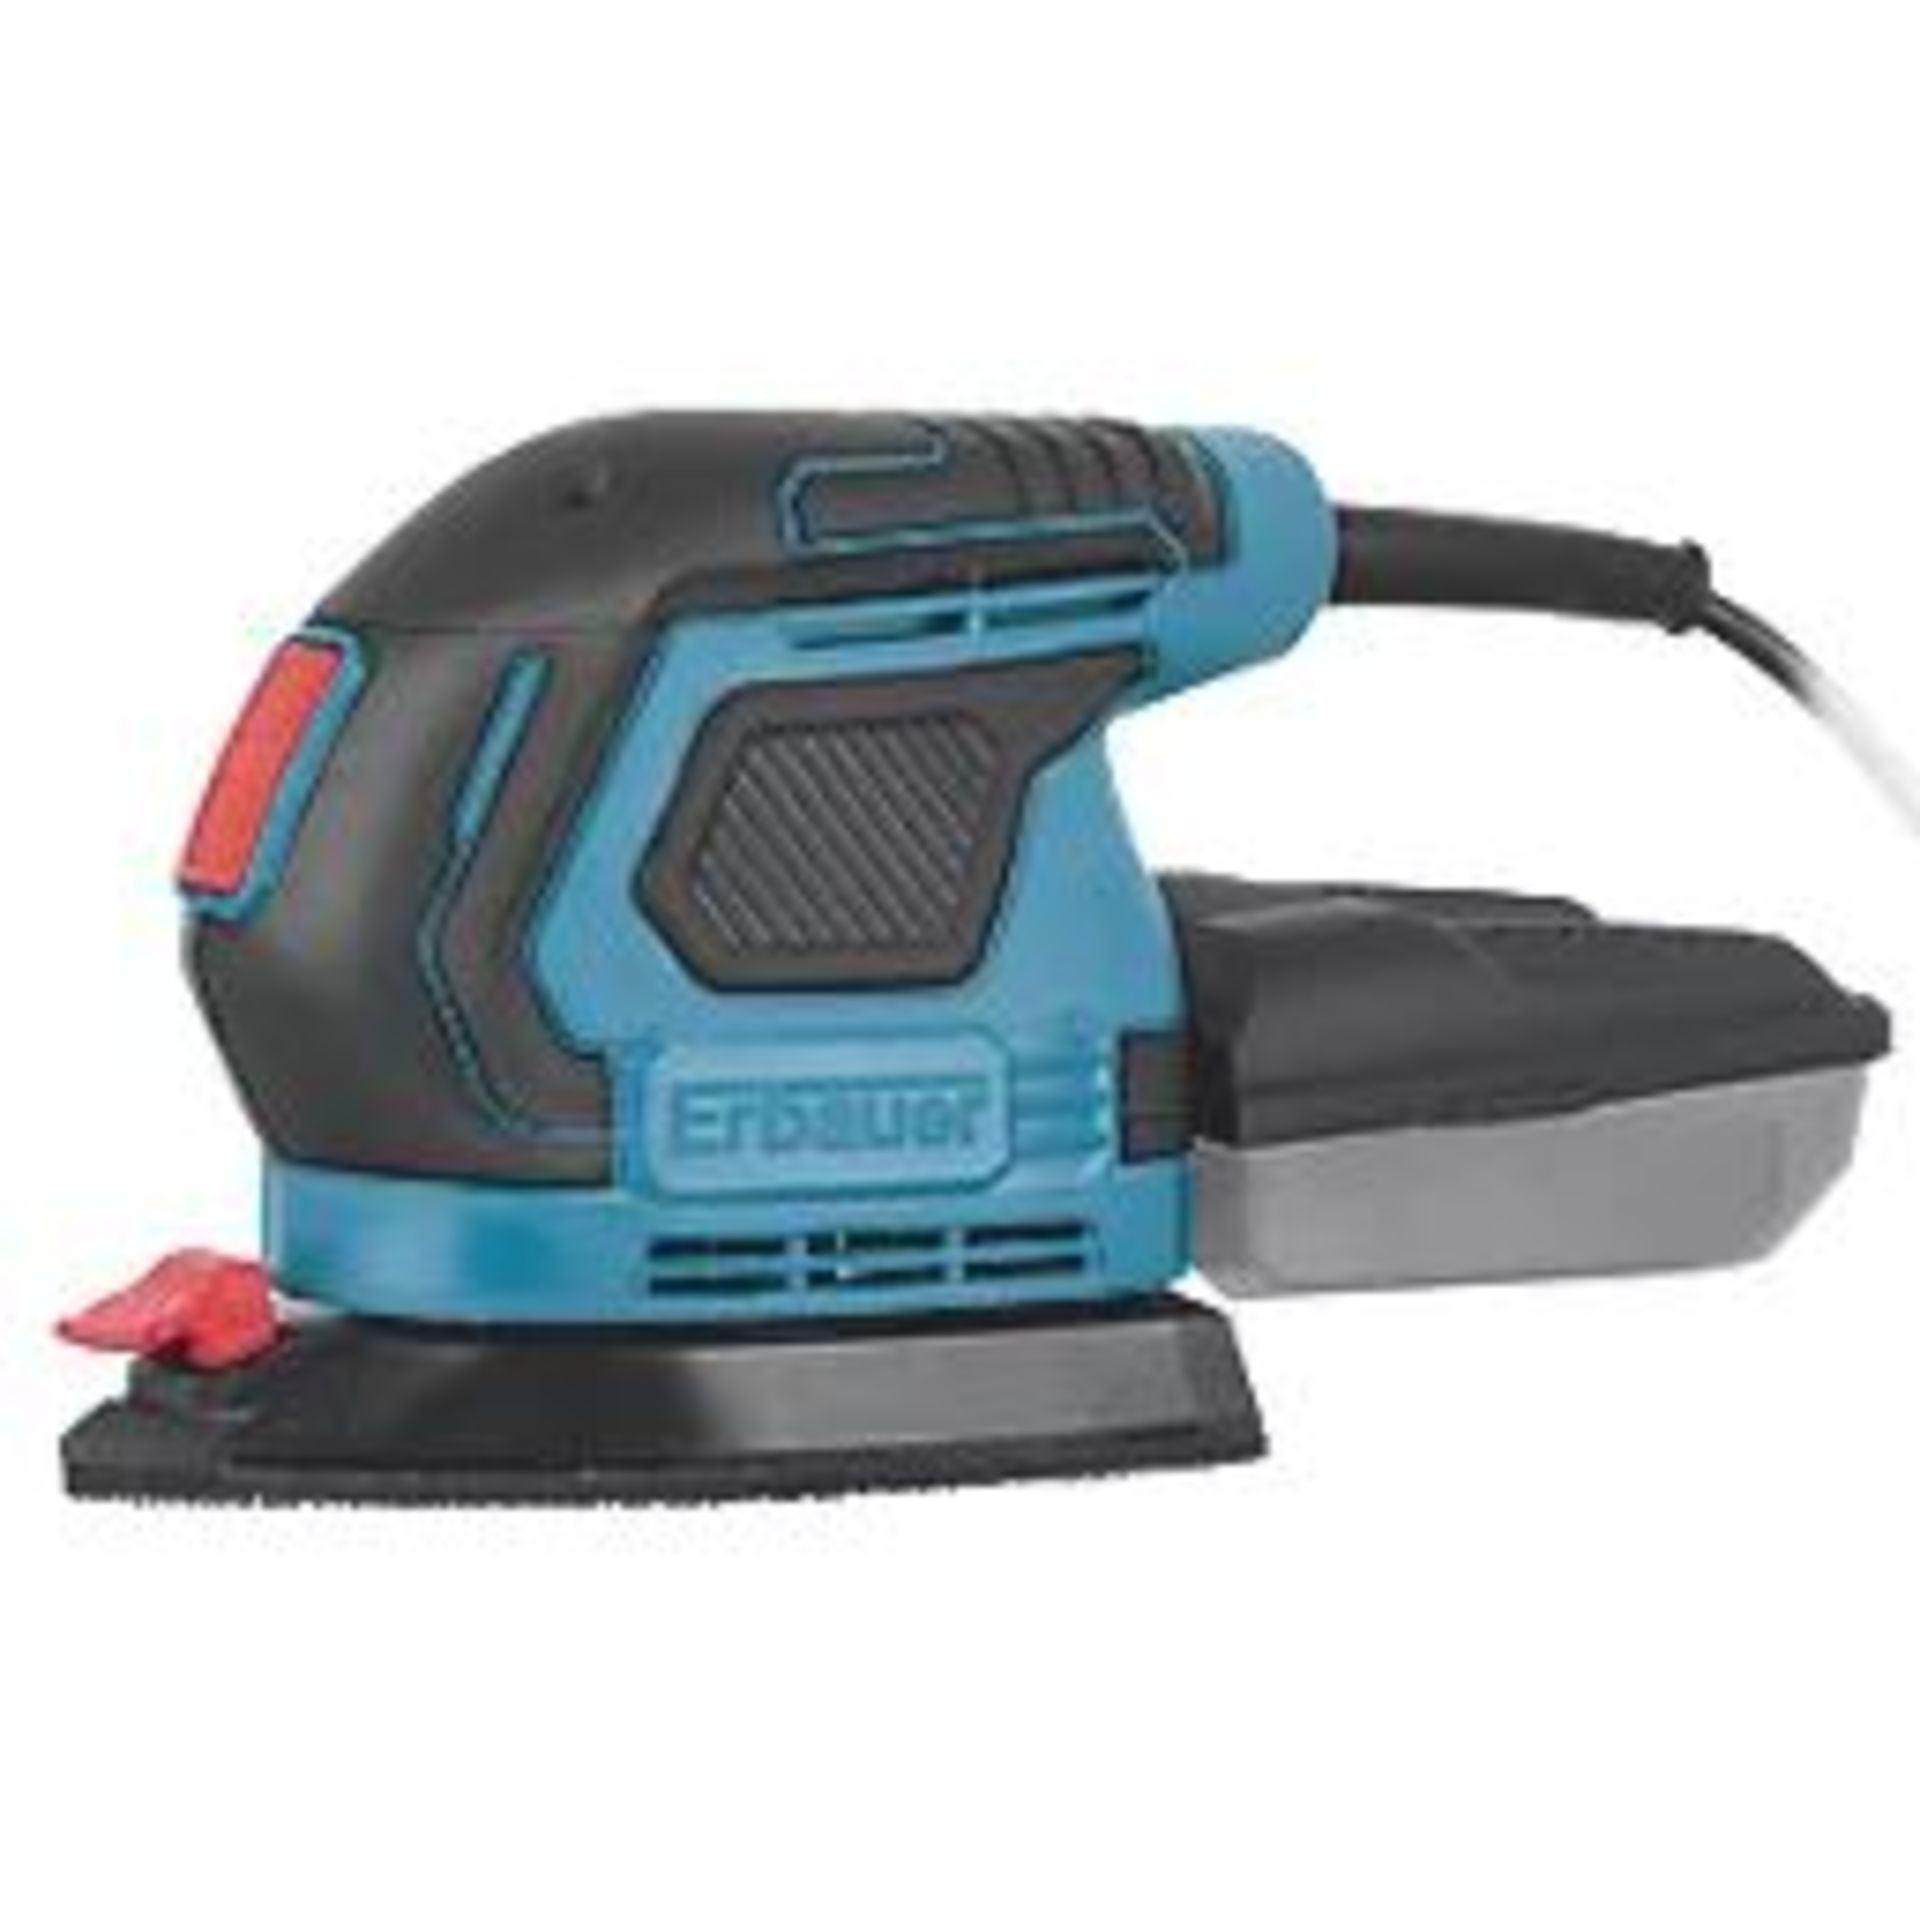 ERBAUER EDLS160 160W ELECTRIC DETAIL SANDER 220-240V. - ER42. Ideal for small surfaces and detail